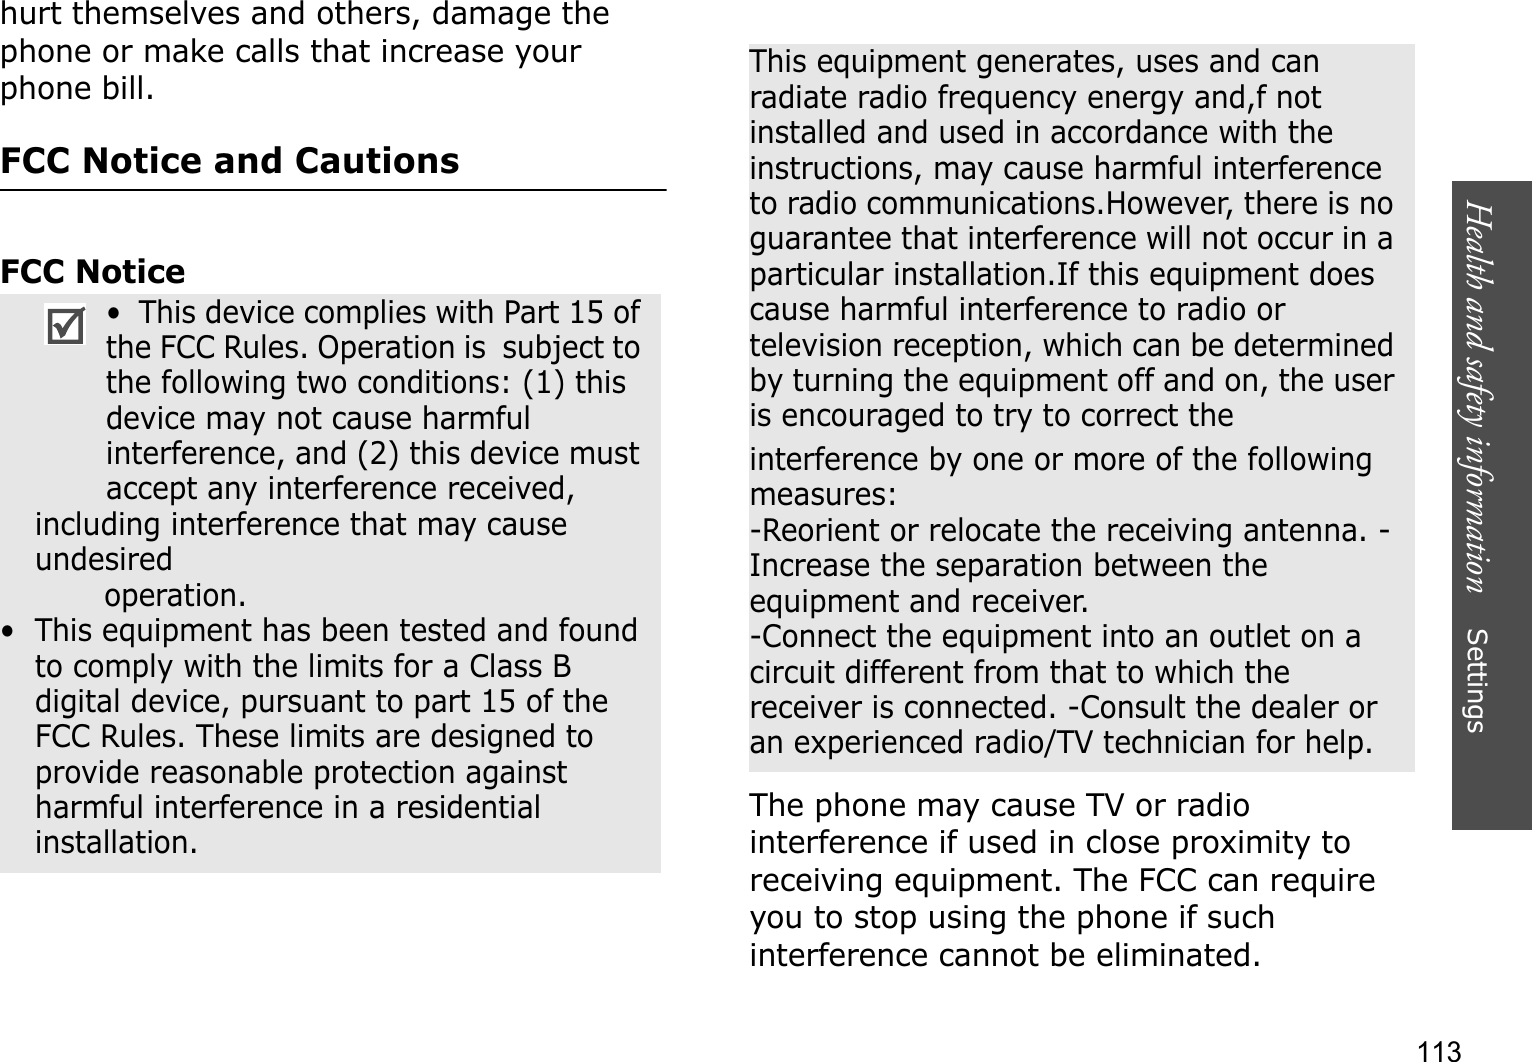 Health and safety information    Settings 113hurt themselves and others, damage the phone or make calls that increase your phone bill.FCC Notice and CautionsFCC NoticeThe phone may cause TV or radio interference if used in close proximity to receiving equipment. The FCC can require you to stop using the phone if such interference cannot be eliminated.•  This device complies with Part 15 of the FCC Rules. Operation is  subject to the following two conditions: (1) this device may not cause harmful interference, and (2) this device must accept any interference received, including interference that may cause undesired                 operation.•  This equipment has been tested and found to comply with the limits for a Class B digital device, pursuant to part 15 of the FCC Rules. These limits are designed to provide reasonable protection against harmful interference in a residential installation.This equipment generates, uses and can radiate radio frequency energy and,f not installed and used in accordance with the instructions, may cause harmful interference to radio communications.However, there is no guarantee that interference will not occur in a particular installation.If this equipment does cause harmful interference to radio or television reception, which can be determined by turning the equipment off and on, the user is encouraged to try to correct theinterference by one or more of the following measures:-Reorient or relocate the receiving antenna. -Increase the separation between the equipment and receiver.-Connect the equipment into an outlet on a circuit different from that to which the receiver is connected. -Consult the dealer or an experienced radio/TV technician for help.